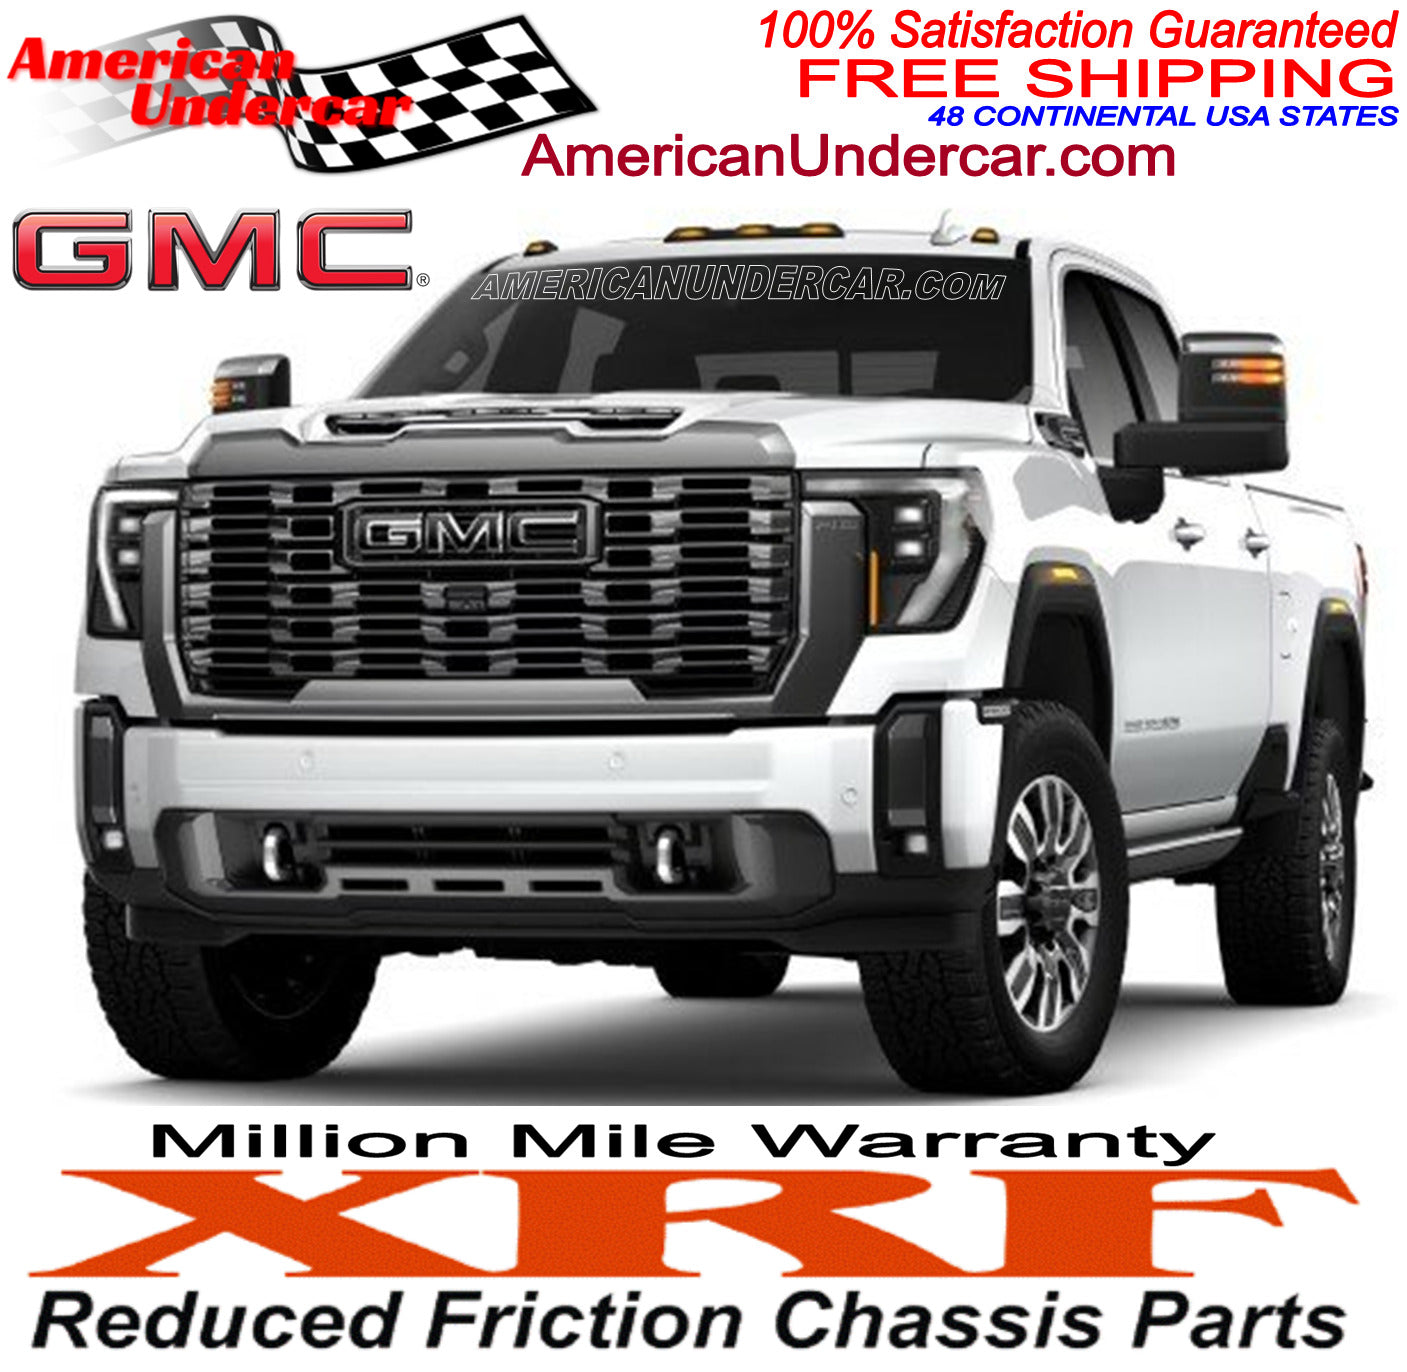 XRF Steering and Suspension Kit for 2011-2019 GMC Sierra 3500HD 4x4